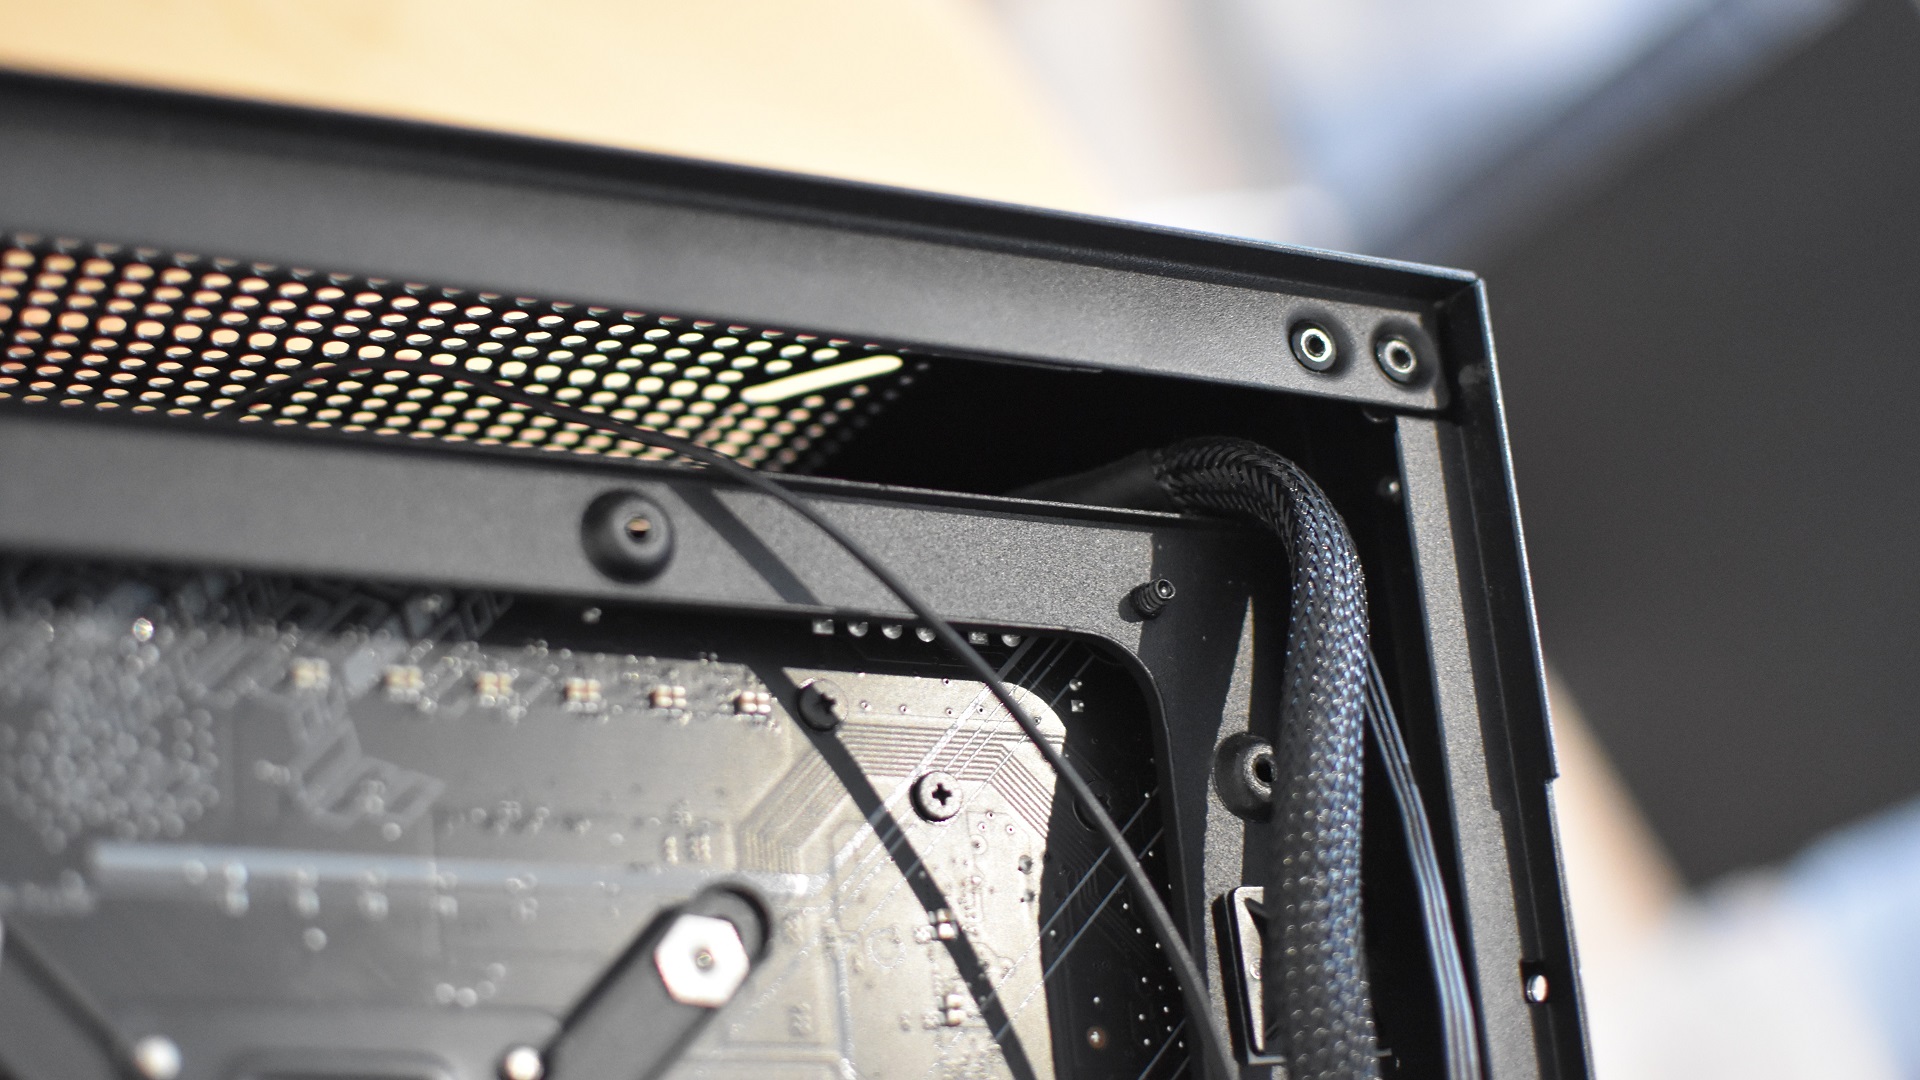 One of several cable routing holes in a gaming PC case.